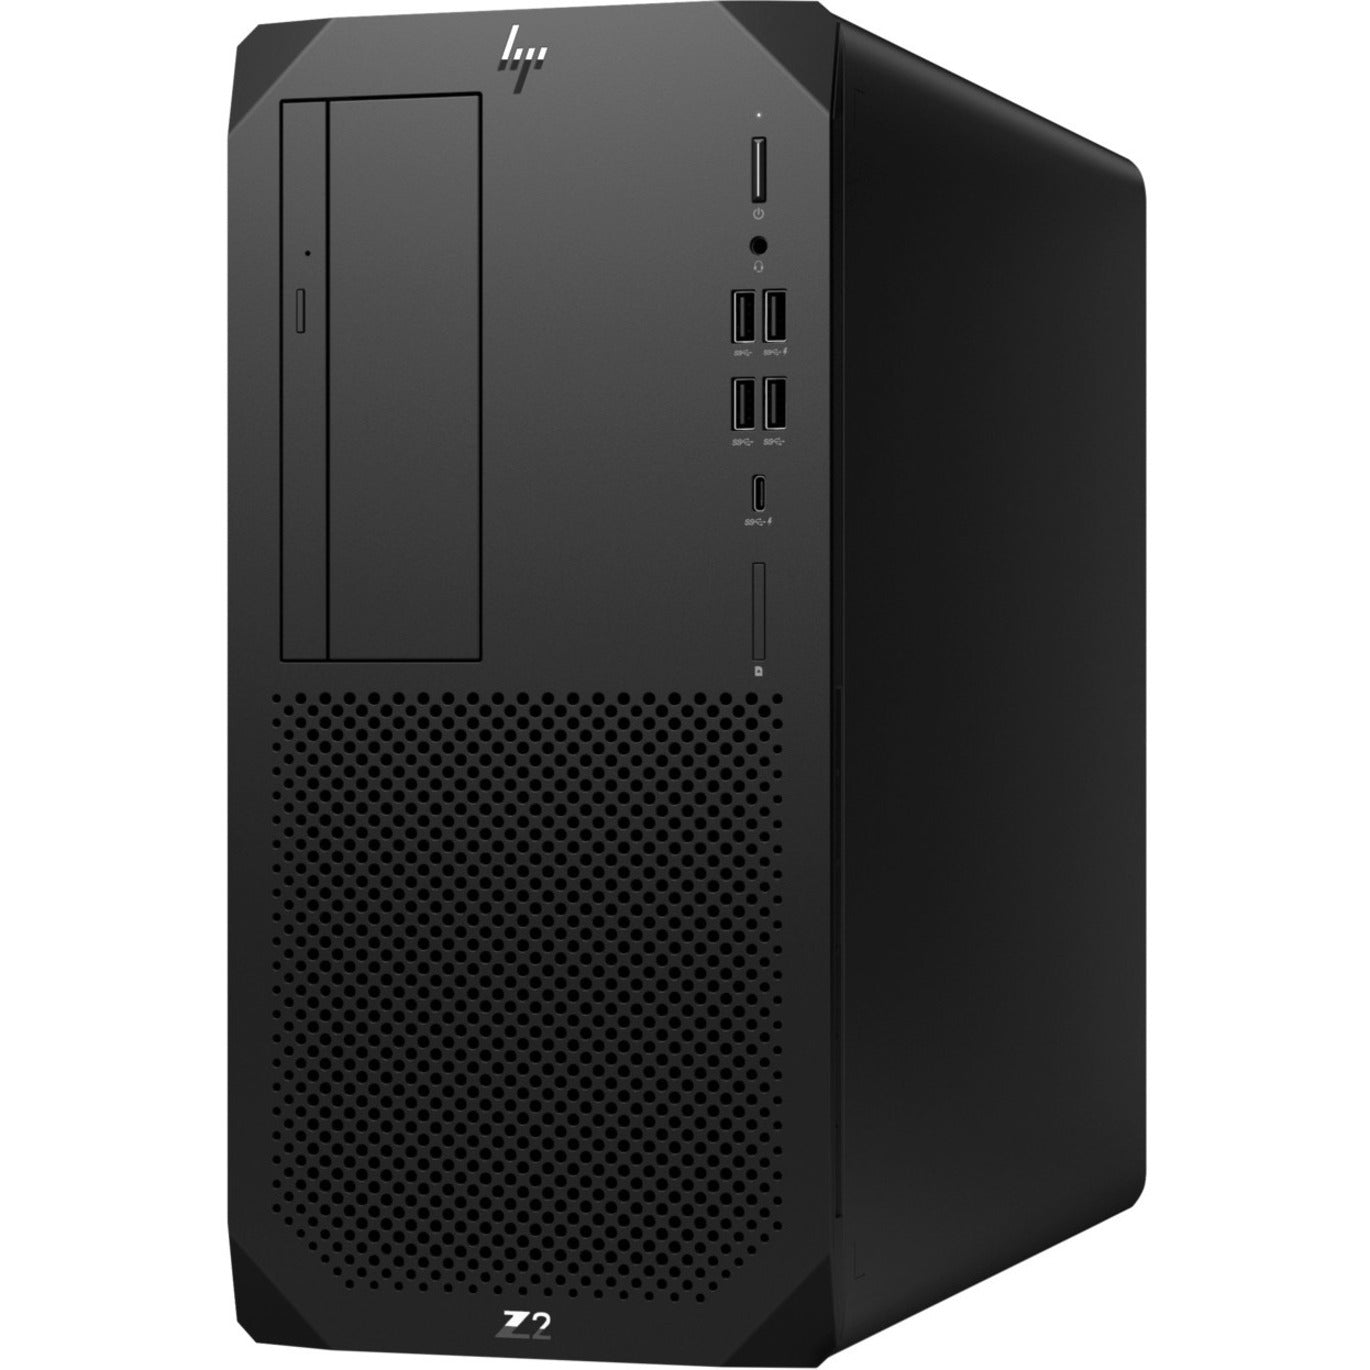 HP Z2 G9 Workstation - Intel Core i7 Dodeca-core - 32GB RAM - 1TB SSD - Tower [Discontinued]